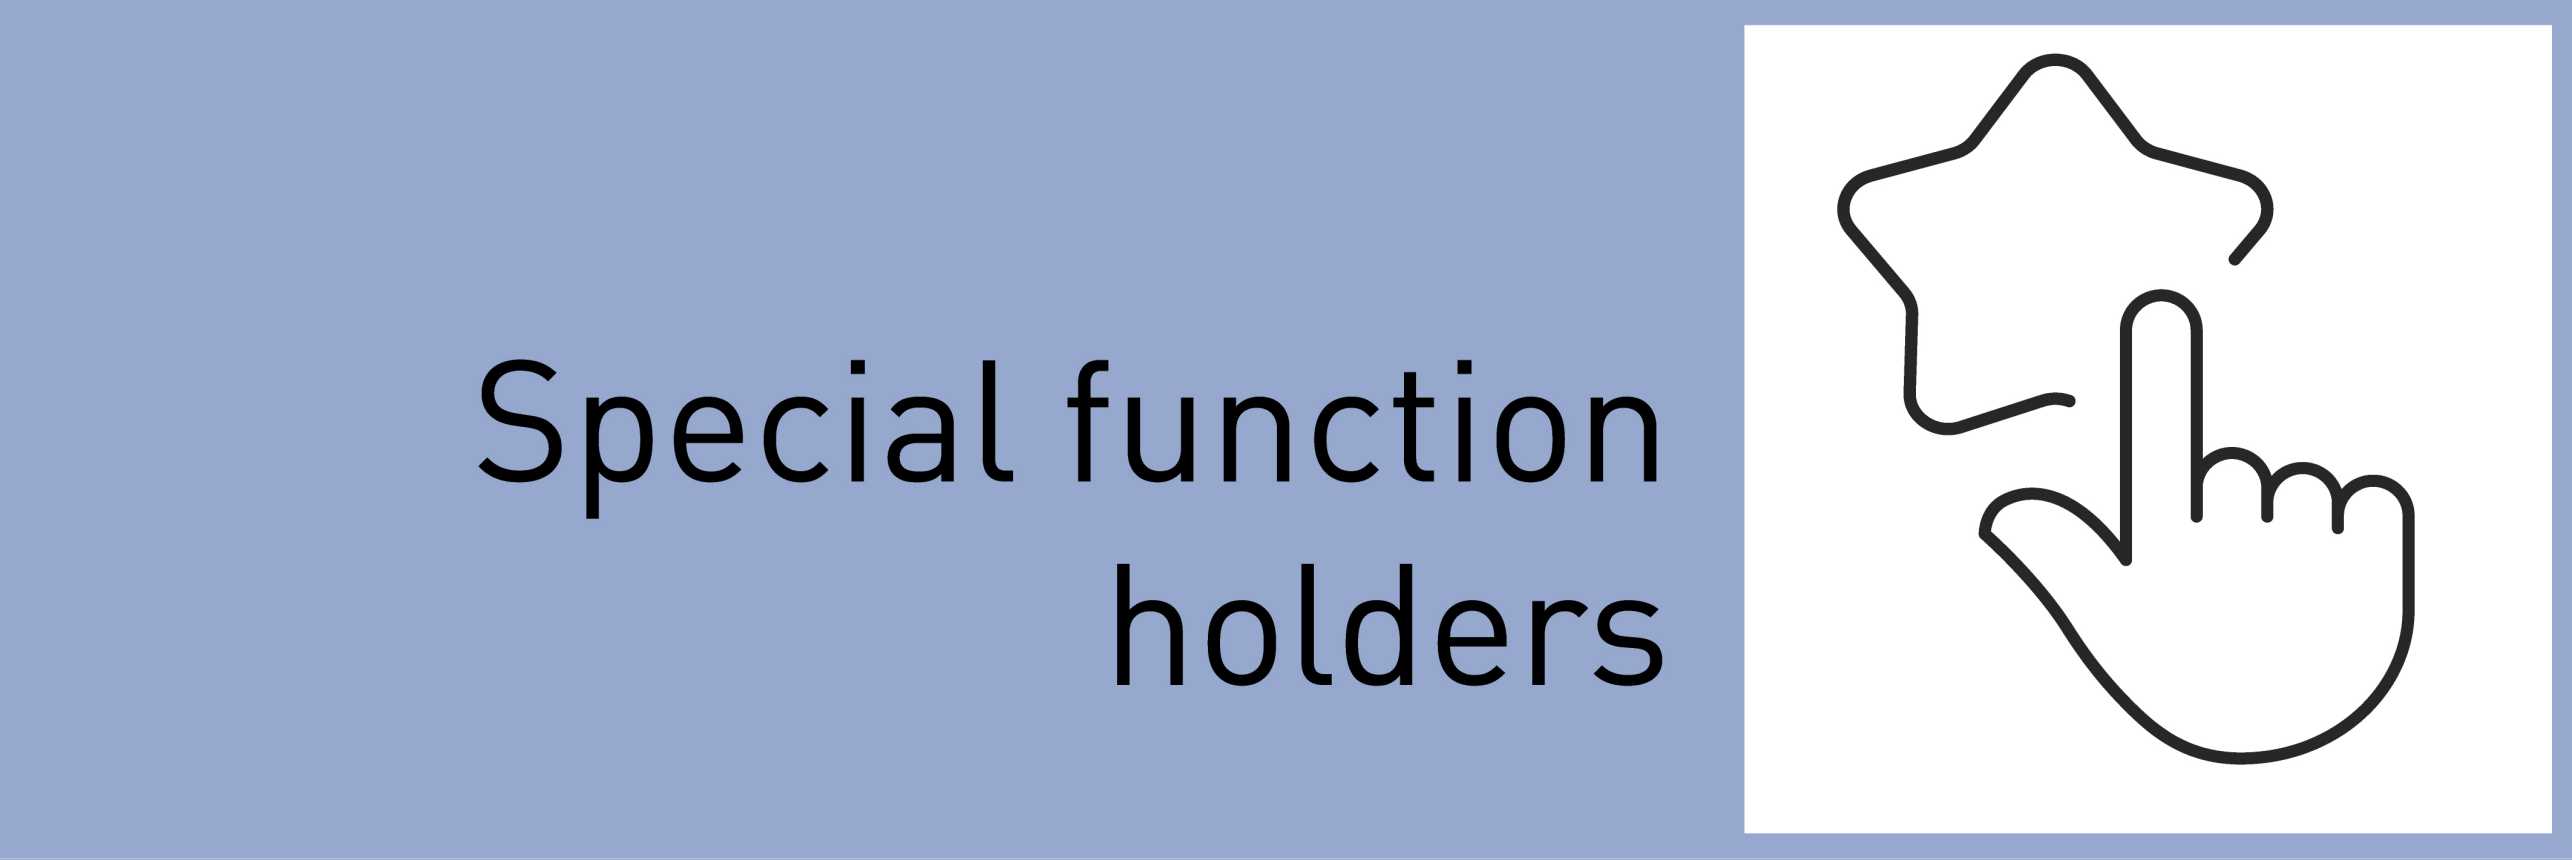 Subpage with information on Special functions (Qualification function holder, trainings)